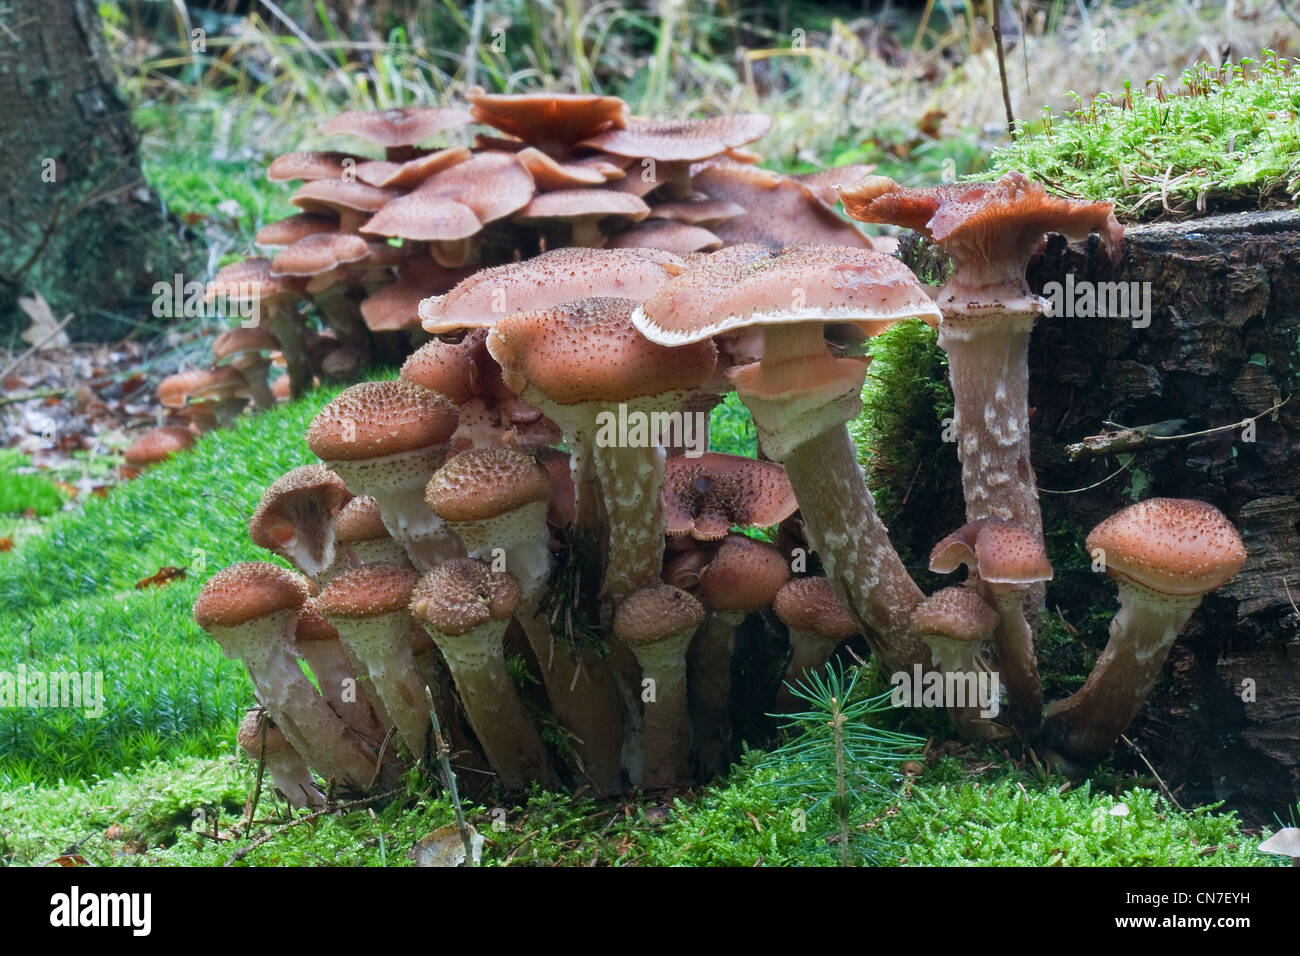 Two groups of Freckled Dapperling (Lepiota aspera) in a forest. Stock Photo